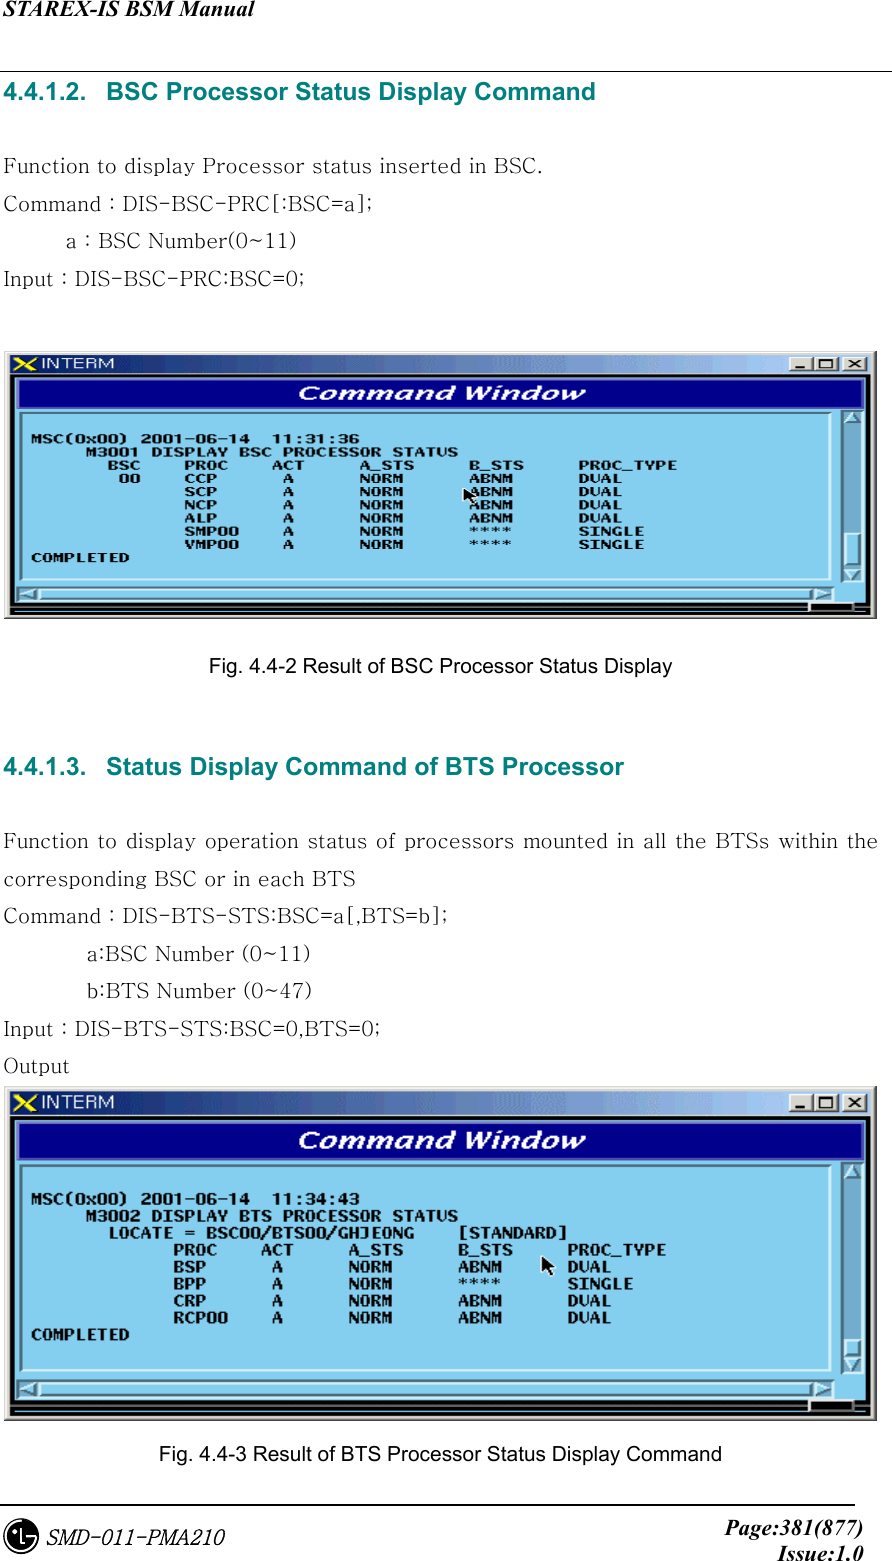 STAREX-IS BSM Manual     Page:381(877)Issue:1.0SMD-011-PMA210 4.4.1.2.   BSC Processor Status Display Command  Function to display Processor status inserted in BSC.   Command : DIS-BSC-PRC[:BSC=a]; a : BSC Number(0~11) Input : DIS-BSC-PRC:BSC=0;   Fig. 4.4-2 Result of BSC Processor Status Display    4.4.1.3.   Status Display Command of BTS Processor  Function to display operation status of processors mounted in all the BTSs within the corresponding BSC or in each BTS Command : DIS-BTS-STS:BSC=a[,BTS=b];   a:BSC Number (0~11)   b:BTS Number (0~47) Input : DIS-BTS-STS:BSC=0,BTS=0; Output    Fig. 4.4-3 Result of BTS Processor Status Display Command 